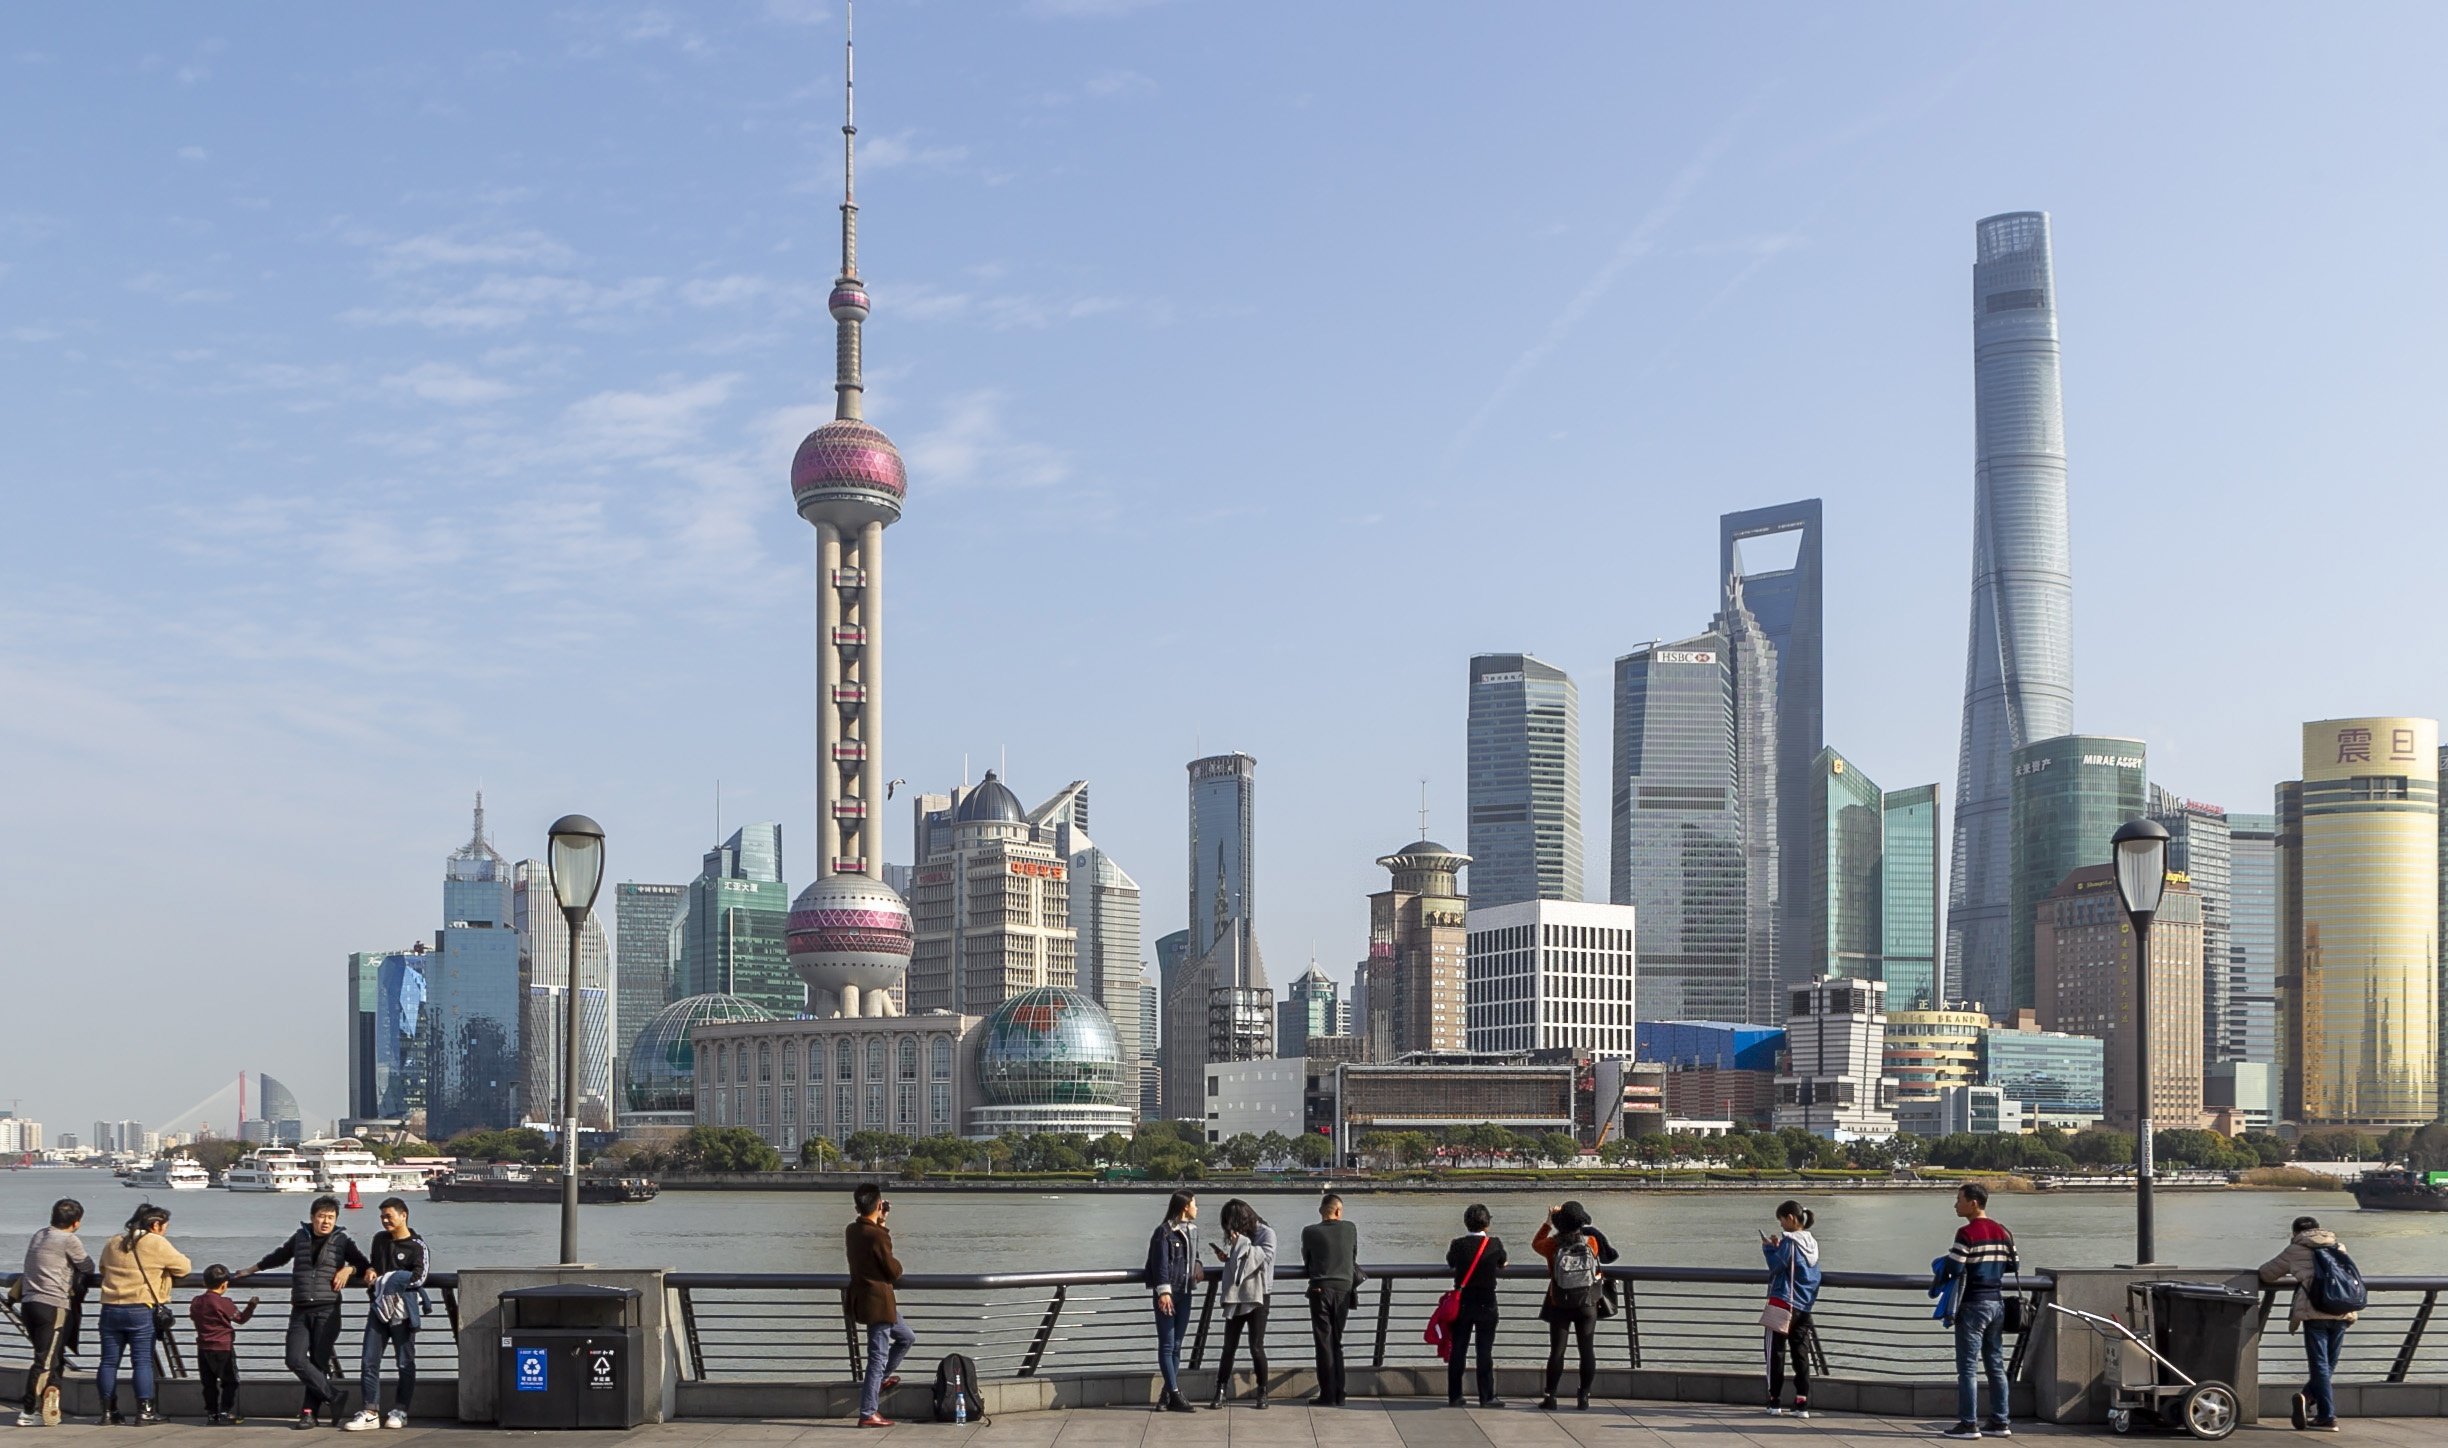 The Bund in Shanghai. Beijing launched the QFLP scheme in China’s financial capital in 2011. Photo: Xinhua